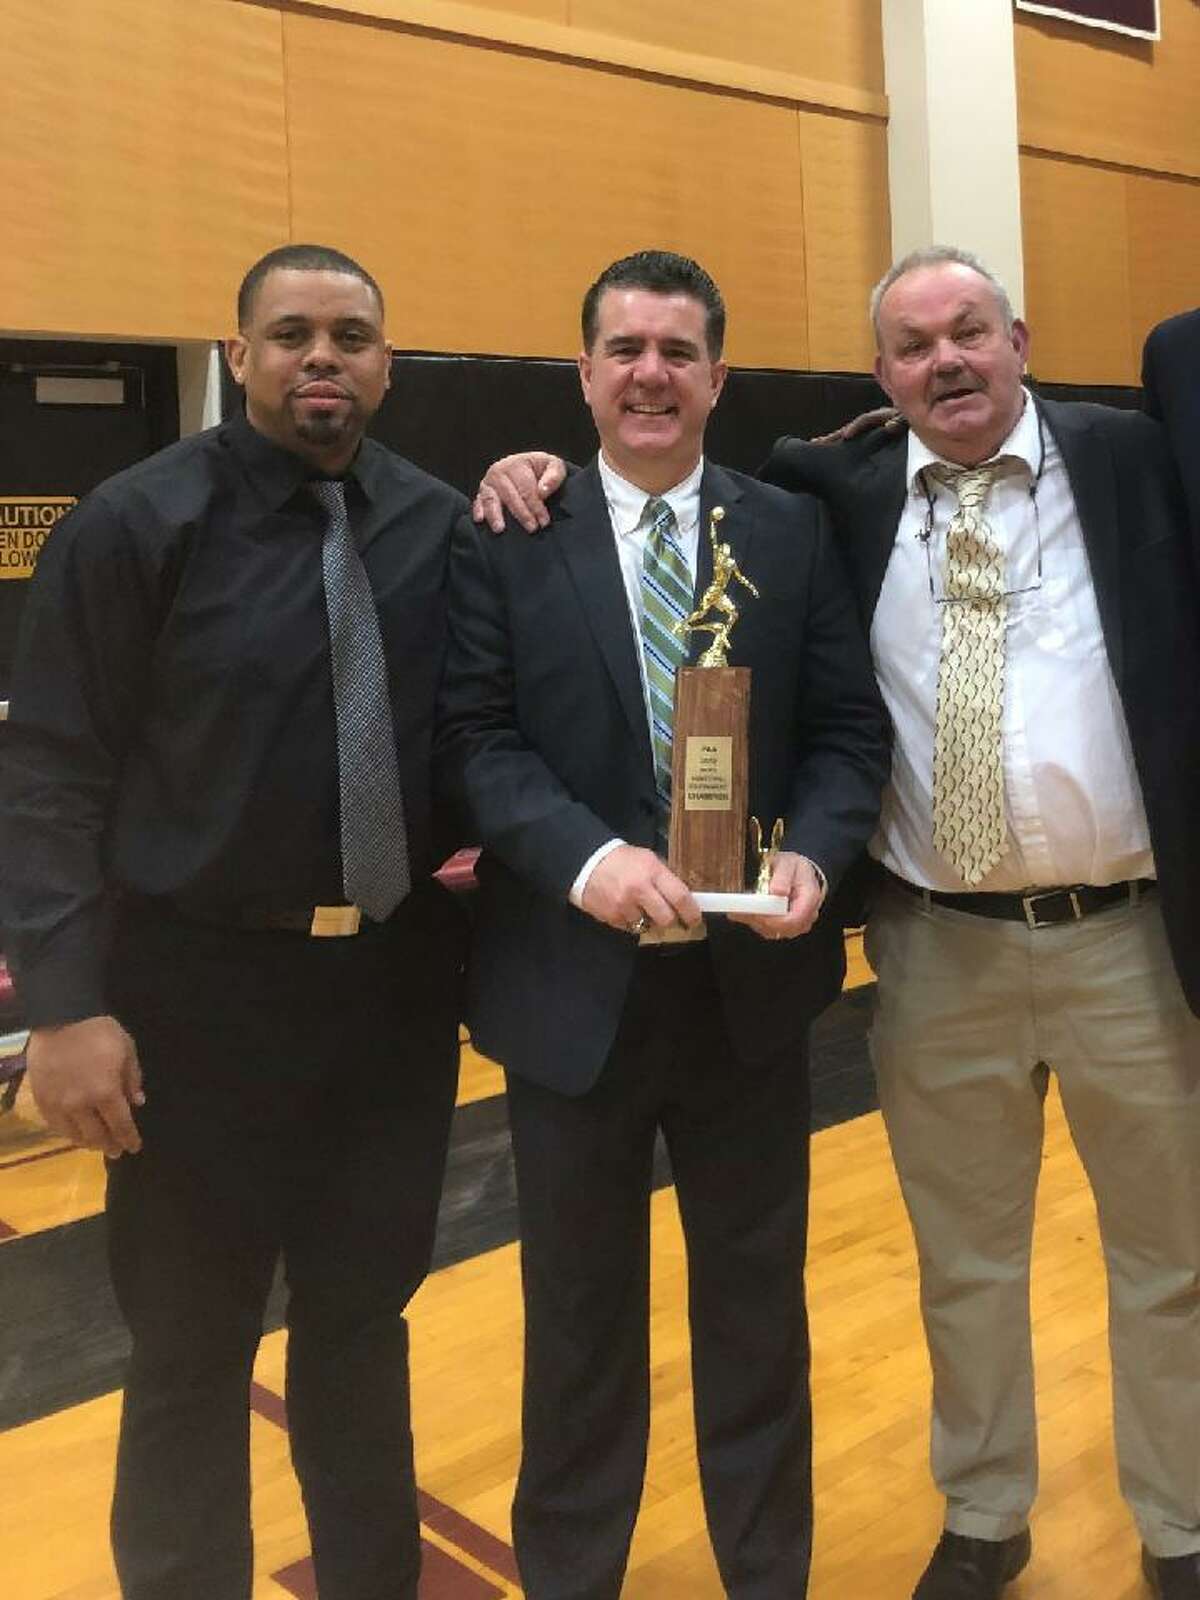 Hamden Hall boys basketball coaches, from left, Danny Oglesby, Sean Doherty and Jim Reynolds celebrate winning the 2019 NEPSAC Class B championship.